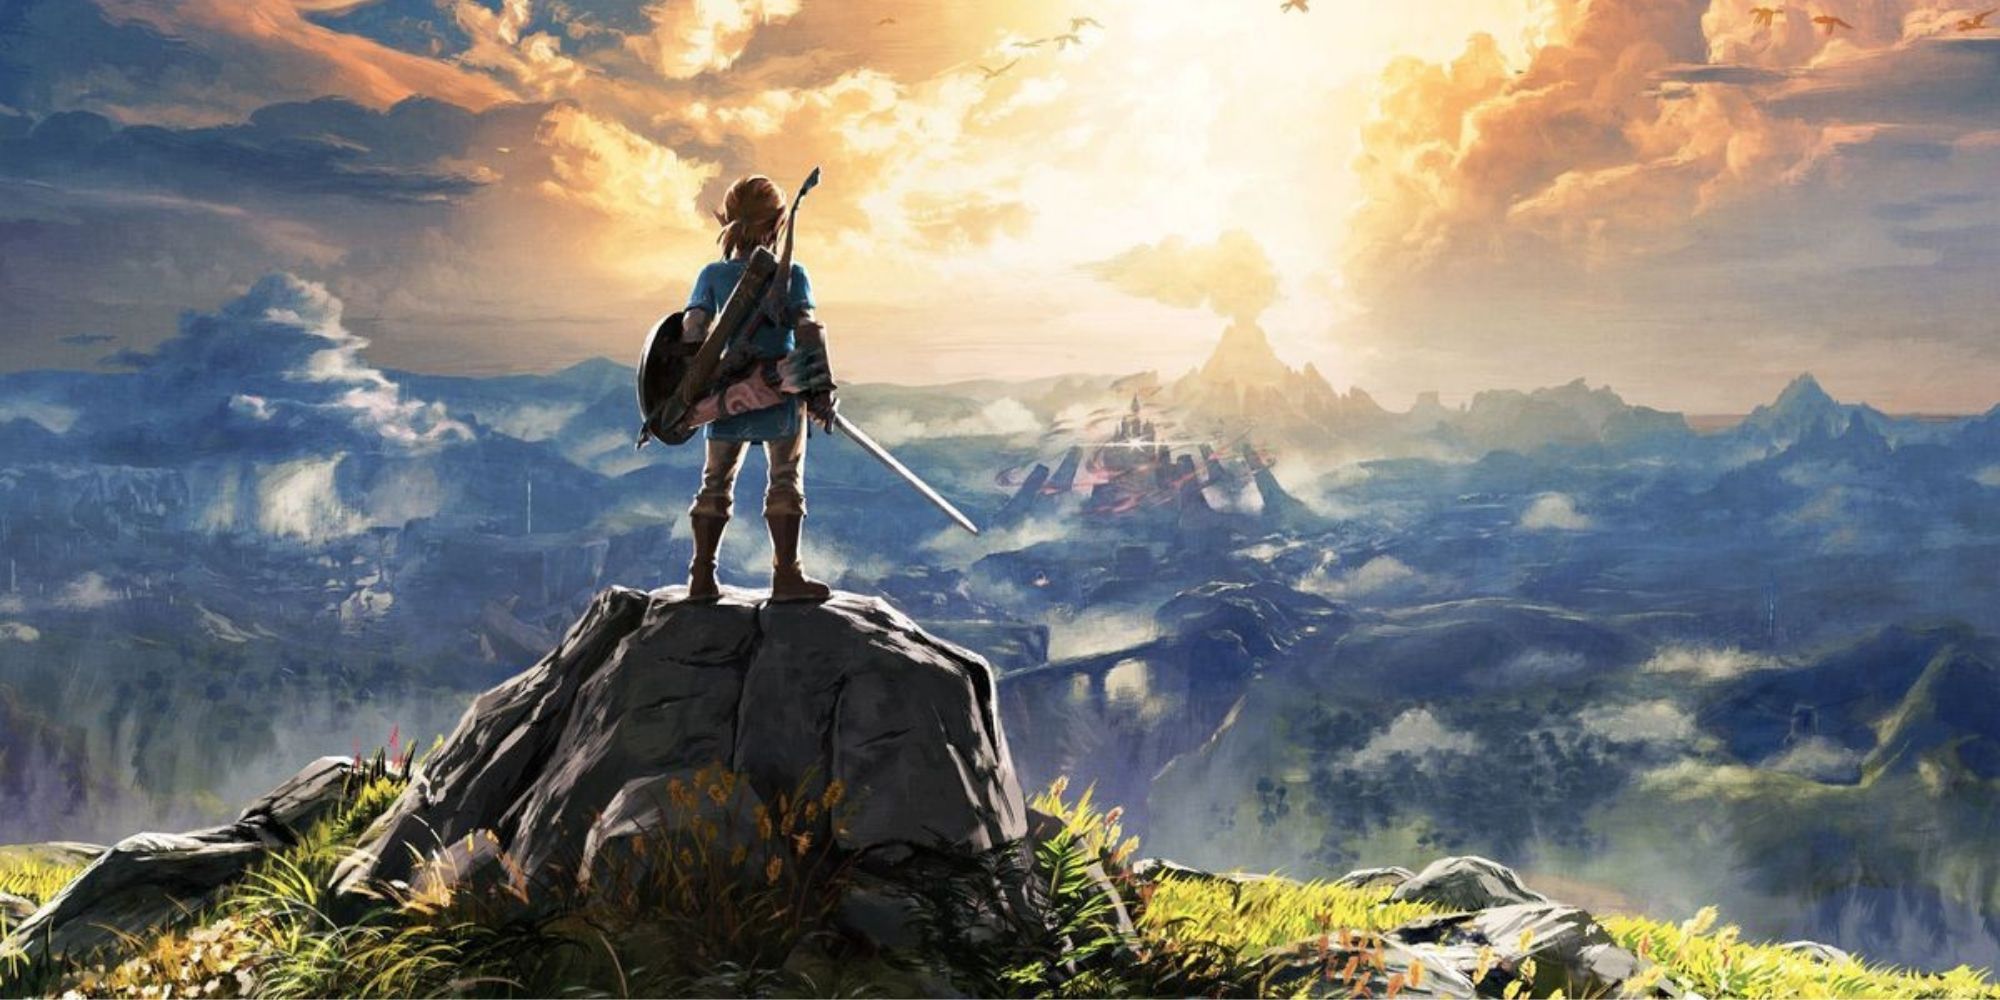 Link faces the horizon while standing on a rock